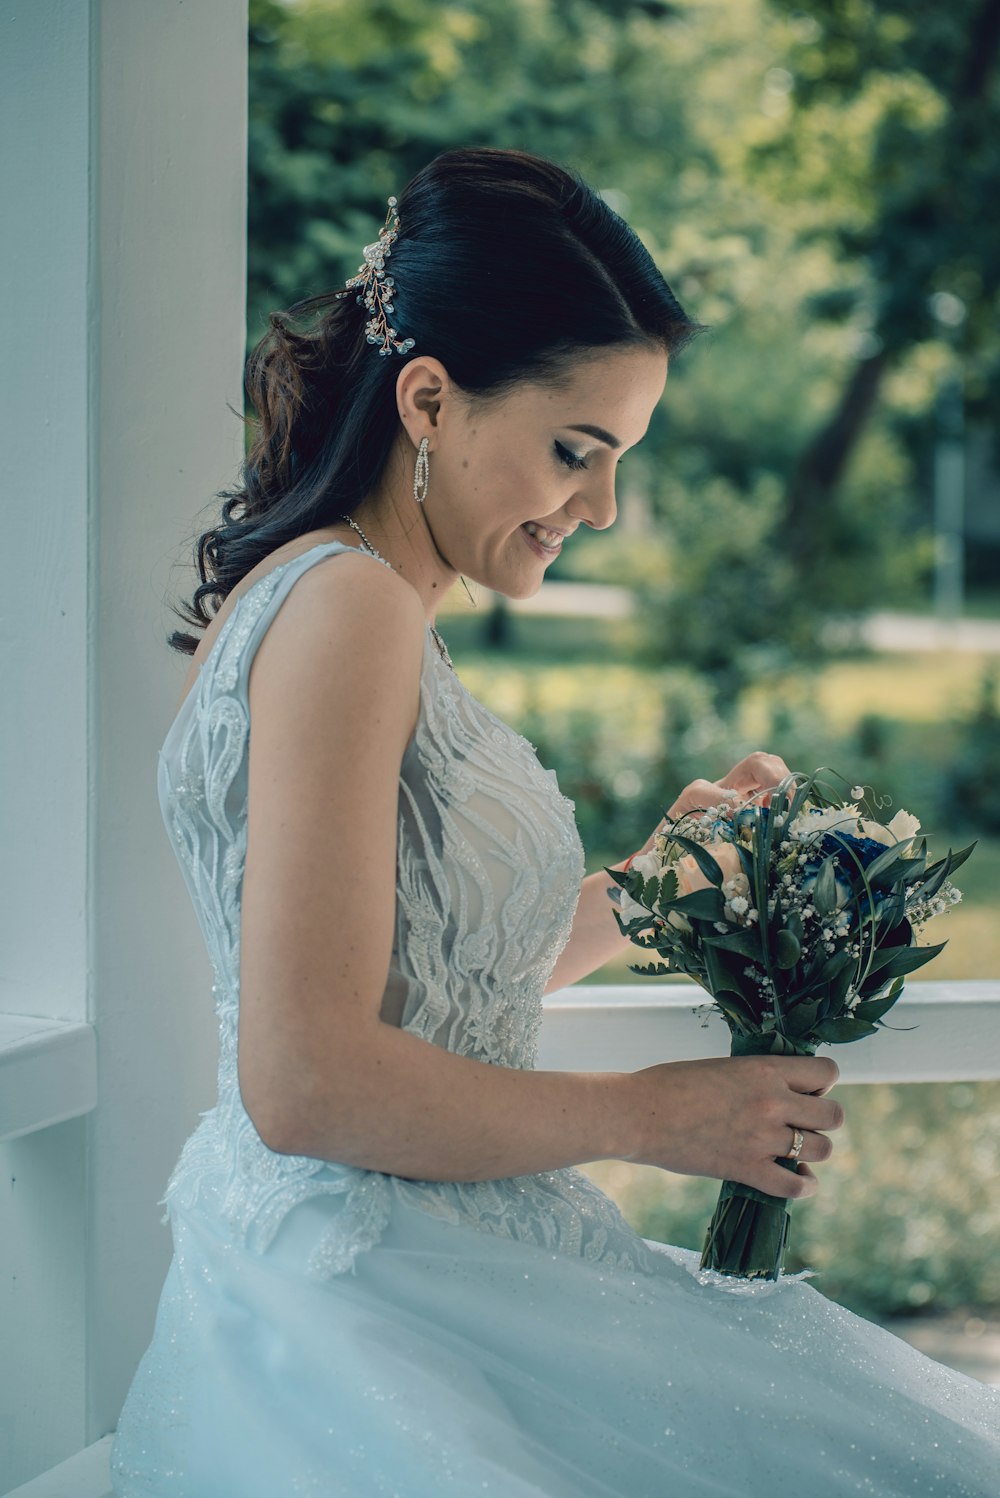 woman in white floral dress holding bouquet of flowers